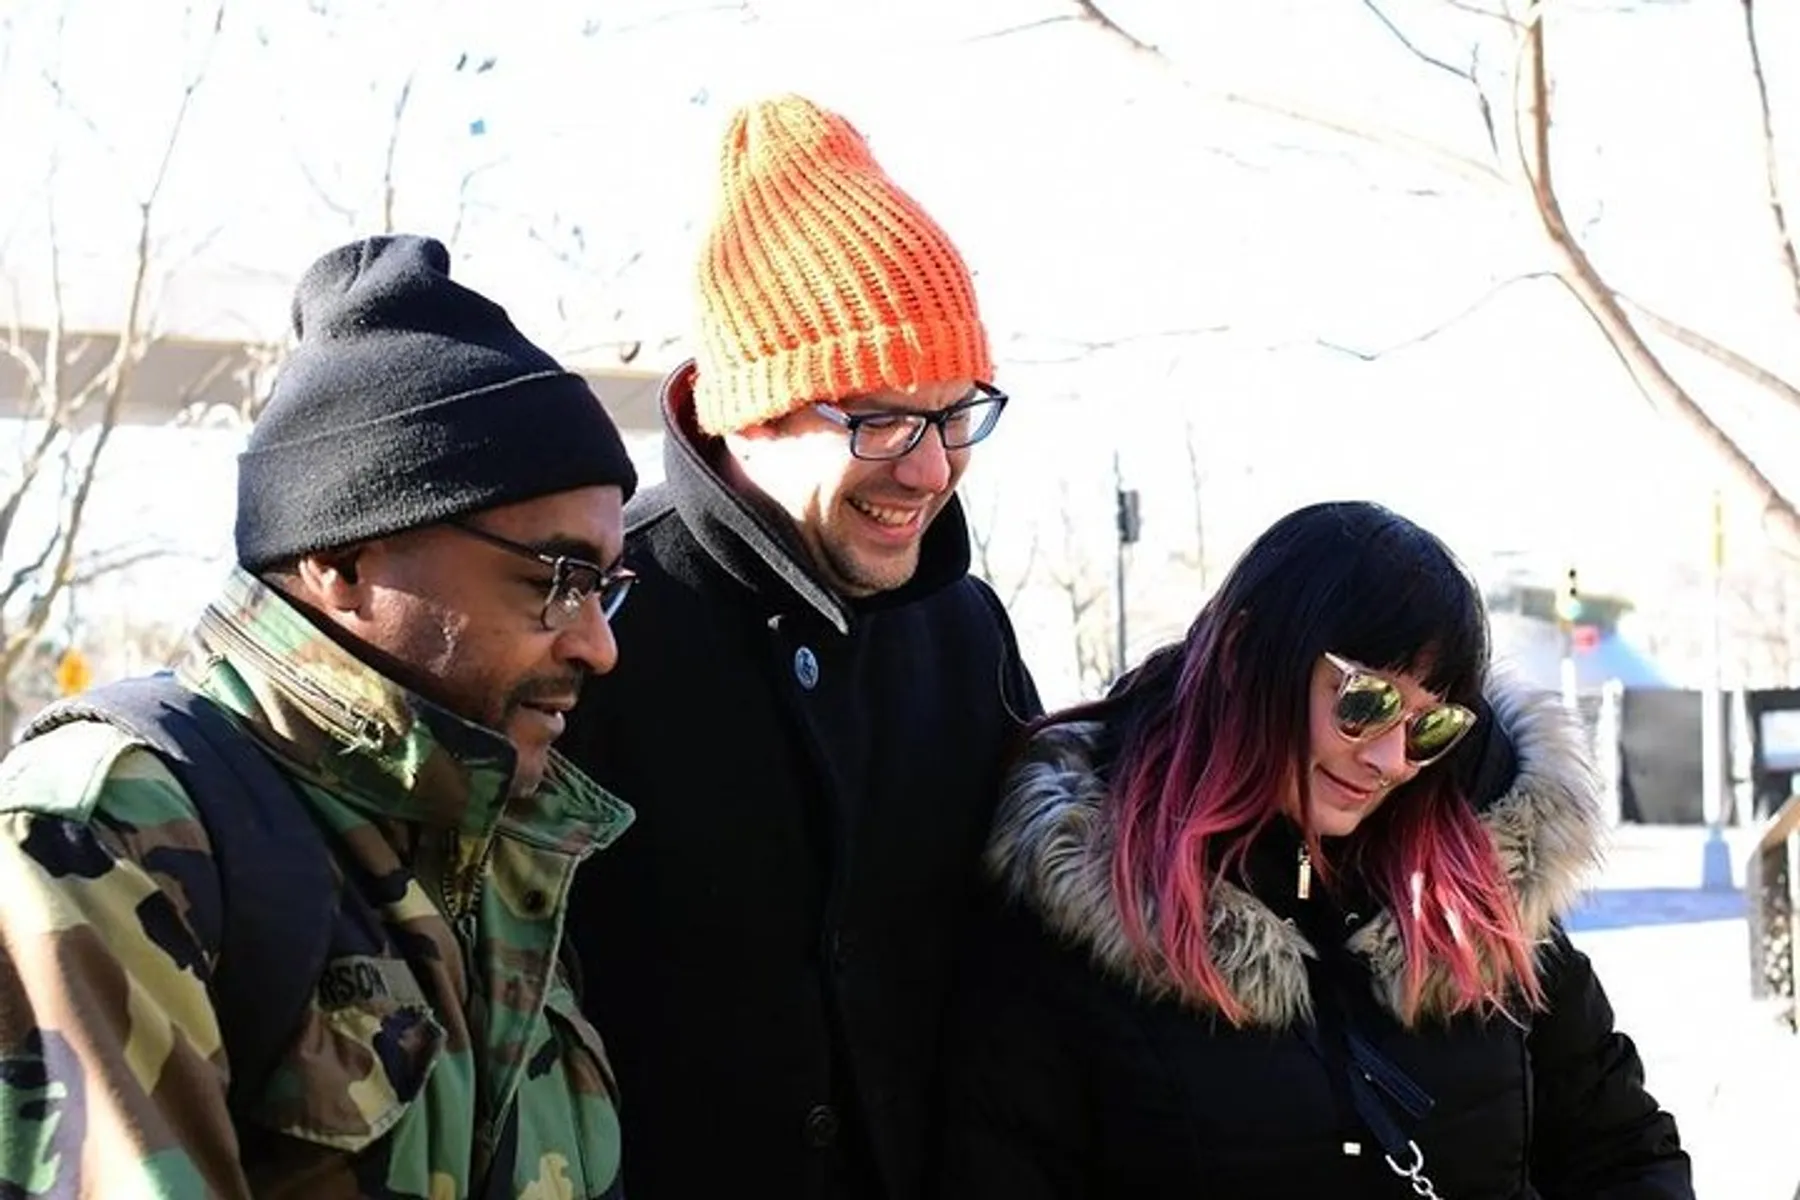 Three people are smiling and looking downward, possibly at something interesting out of frame, while dressed in warm clothes suggesting a cool outdoor setting.